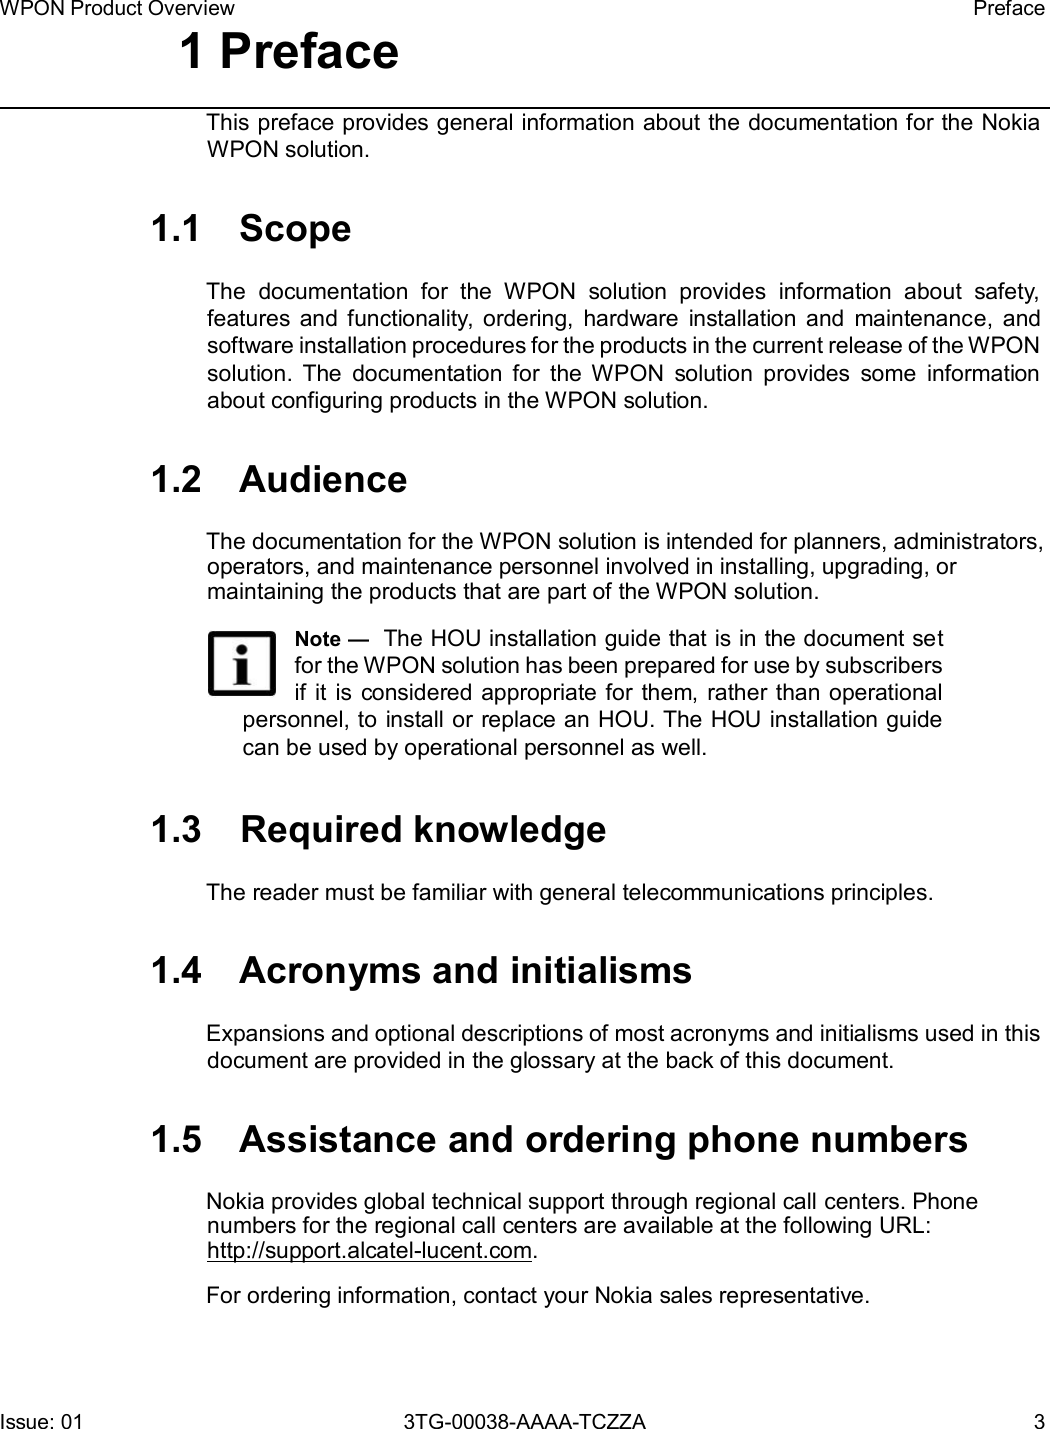 Page 3 of Nokia Bell 7577WPONAPDC WPON User Manual WPON Product Overview